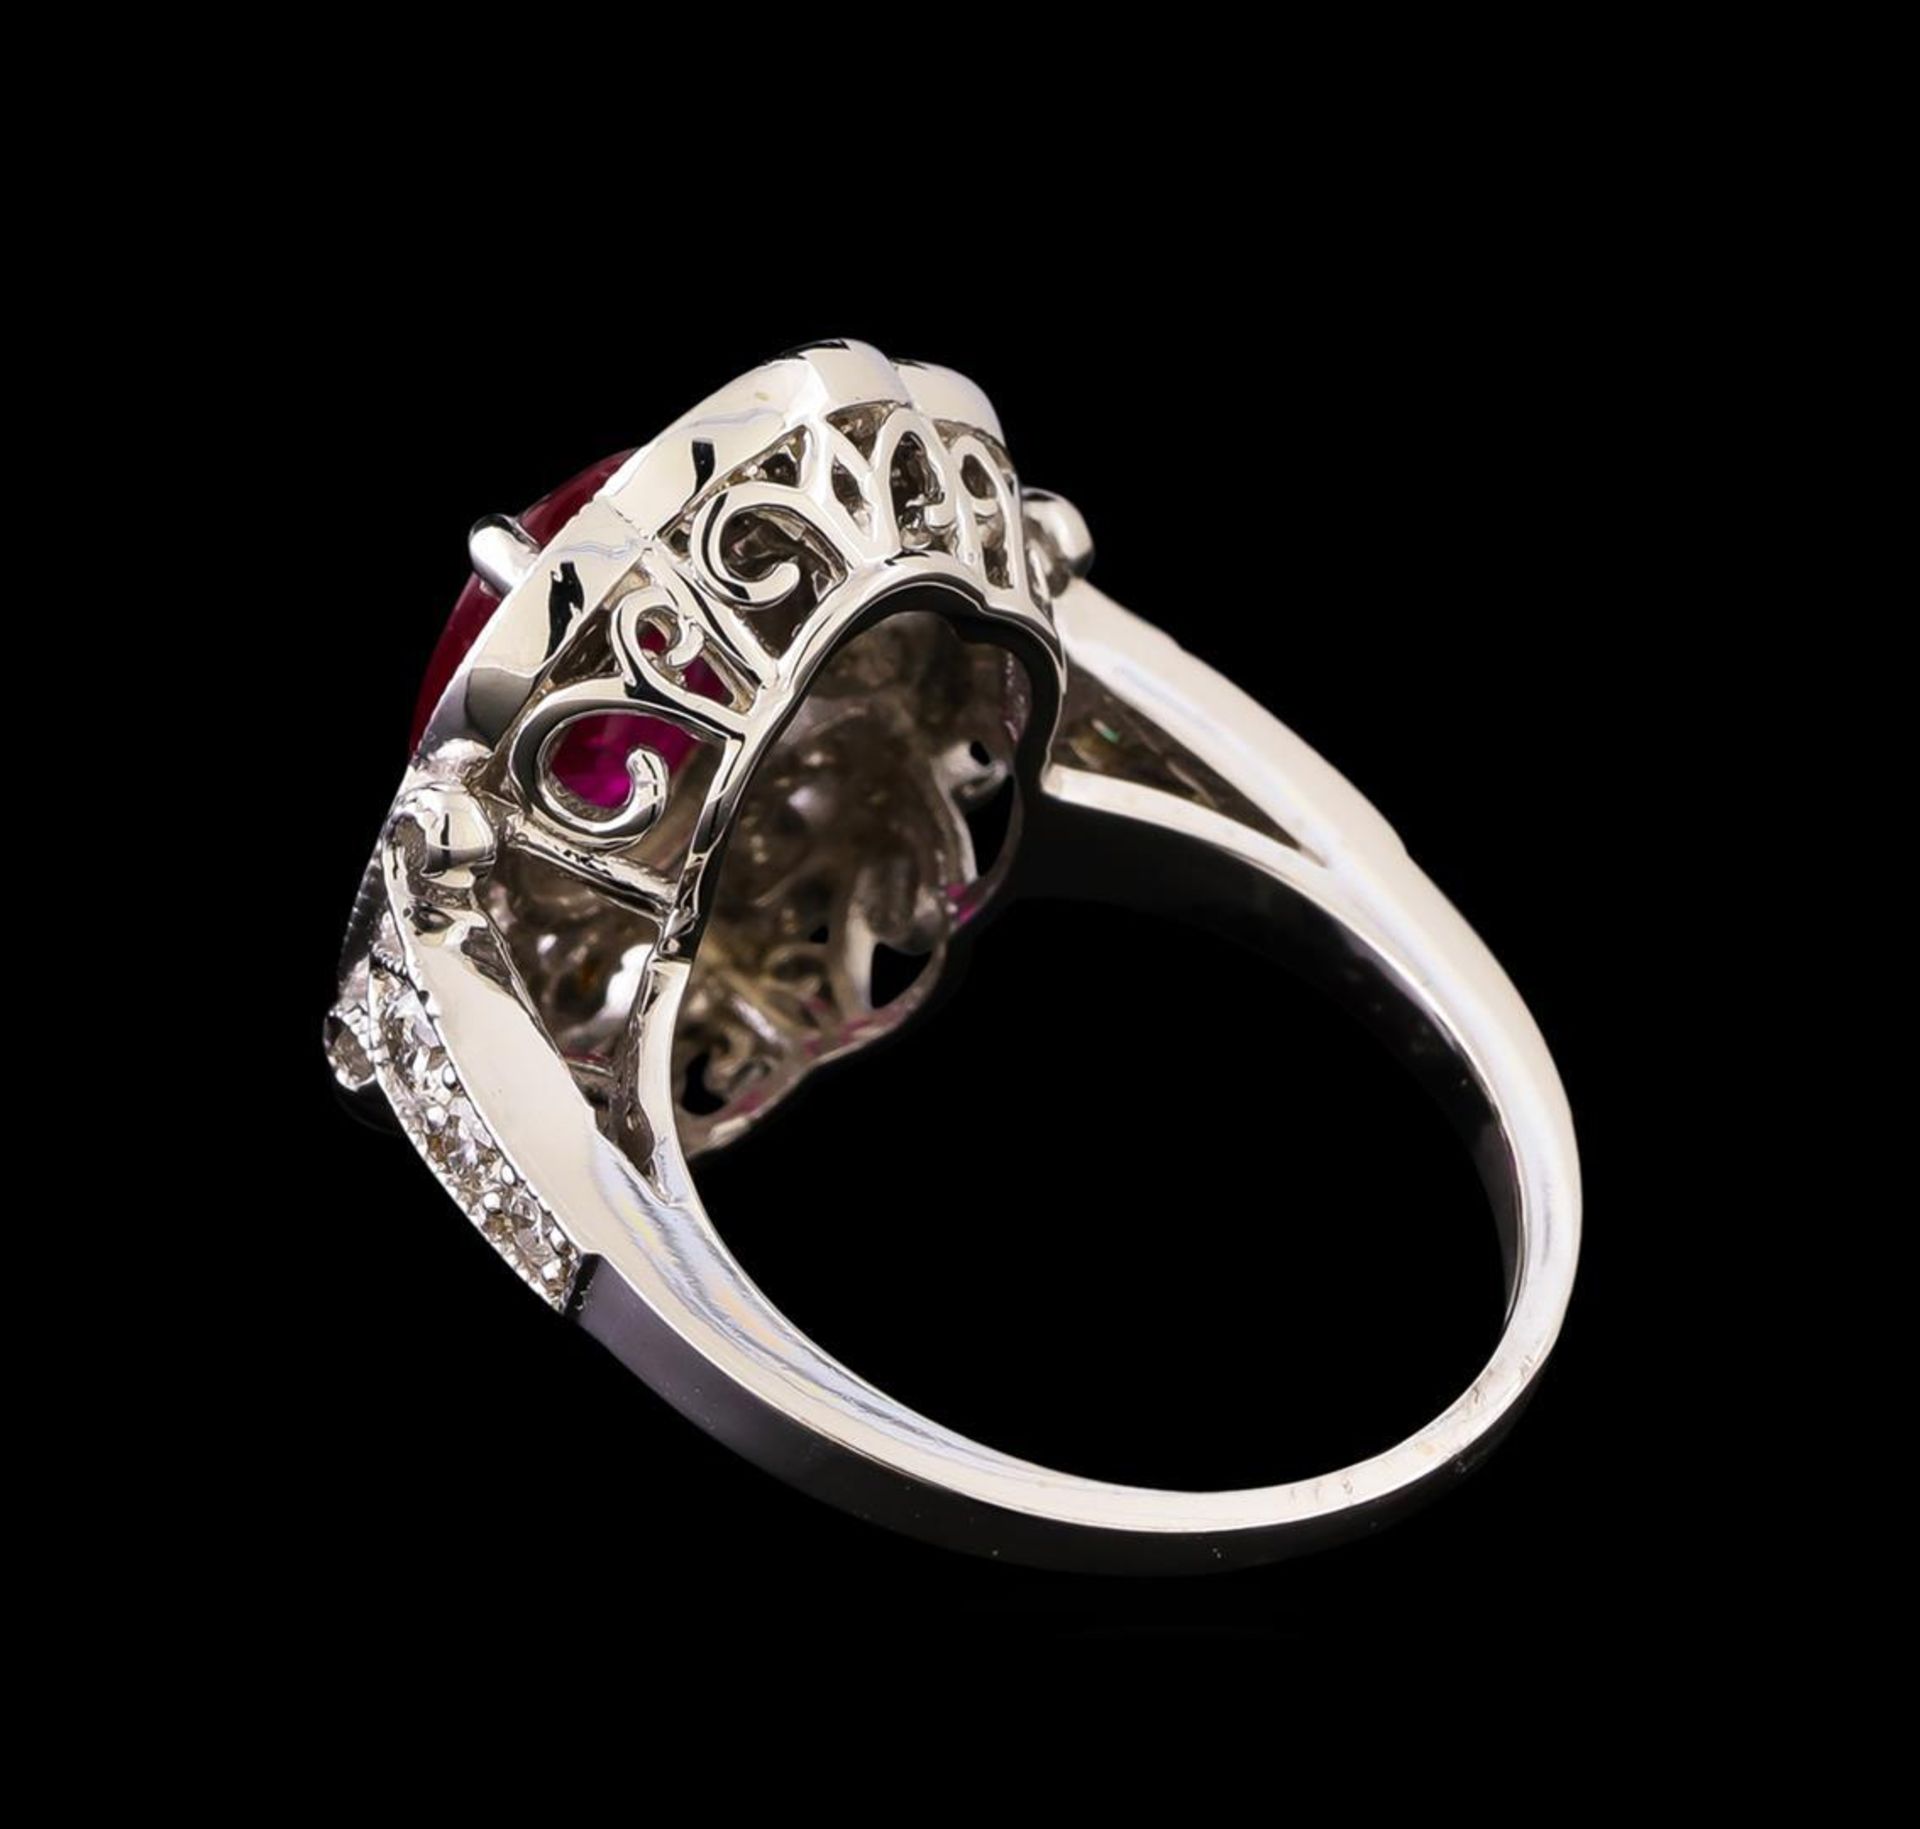 GIA Cert 2.53 ctw Ruby and Diamond Ring - 14KT White Gold - Image 3 of 7